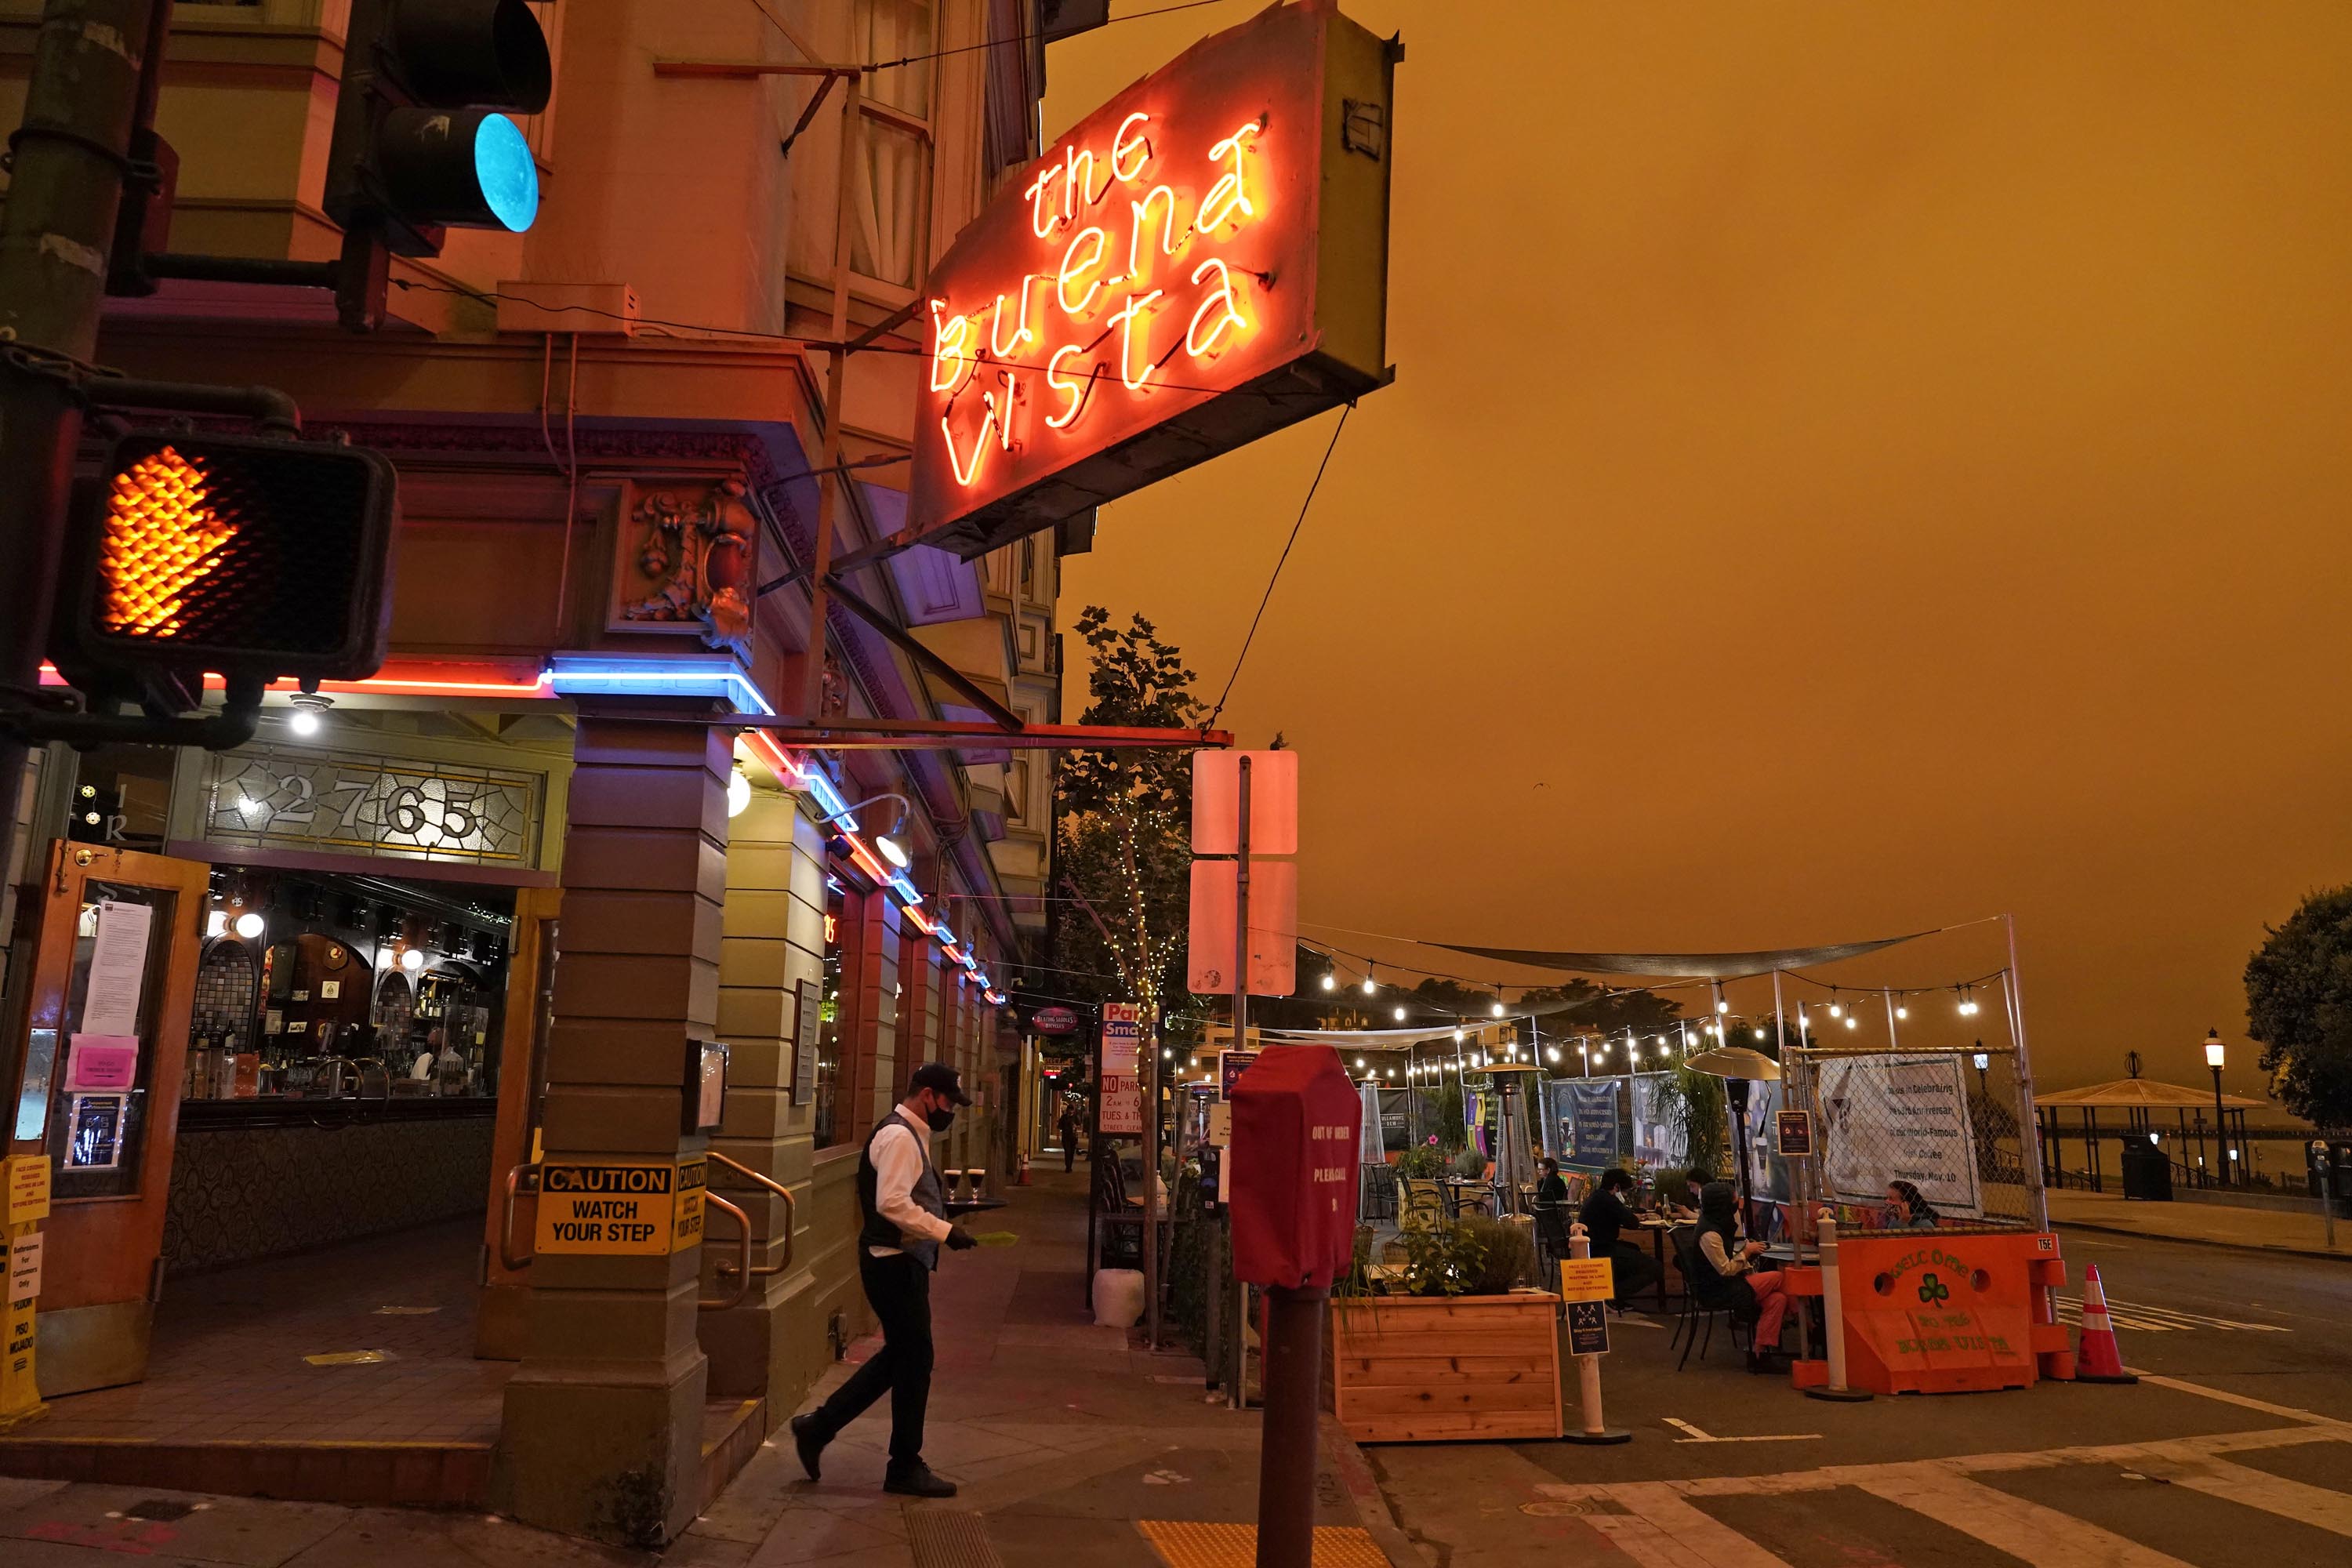 A waiter carries a tray to people having lunch at the Buena Vista Cafe in San Francisco, under darkened skies from wildfire smoke, on Wednesday.